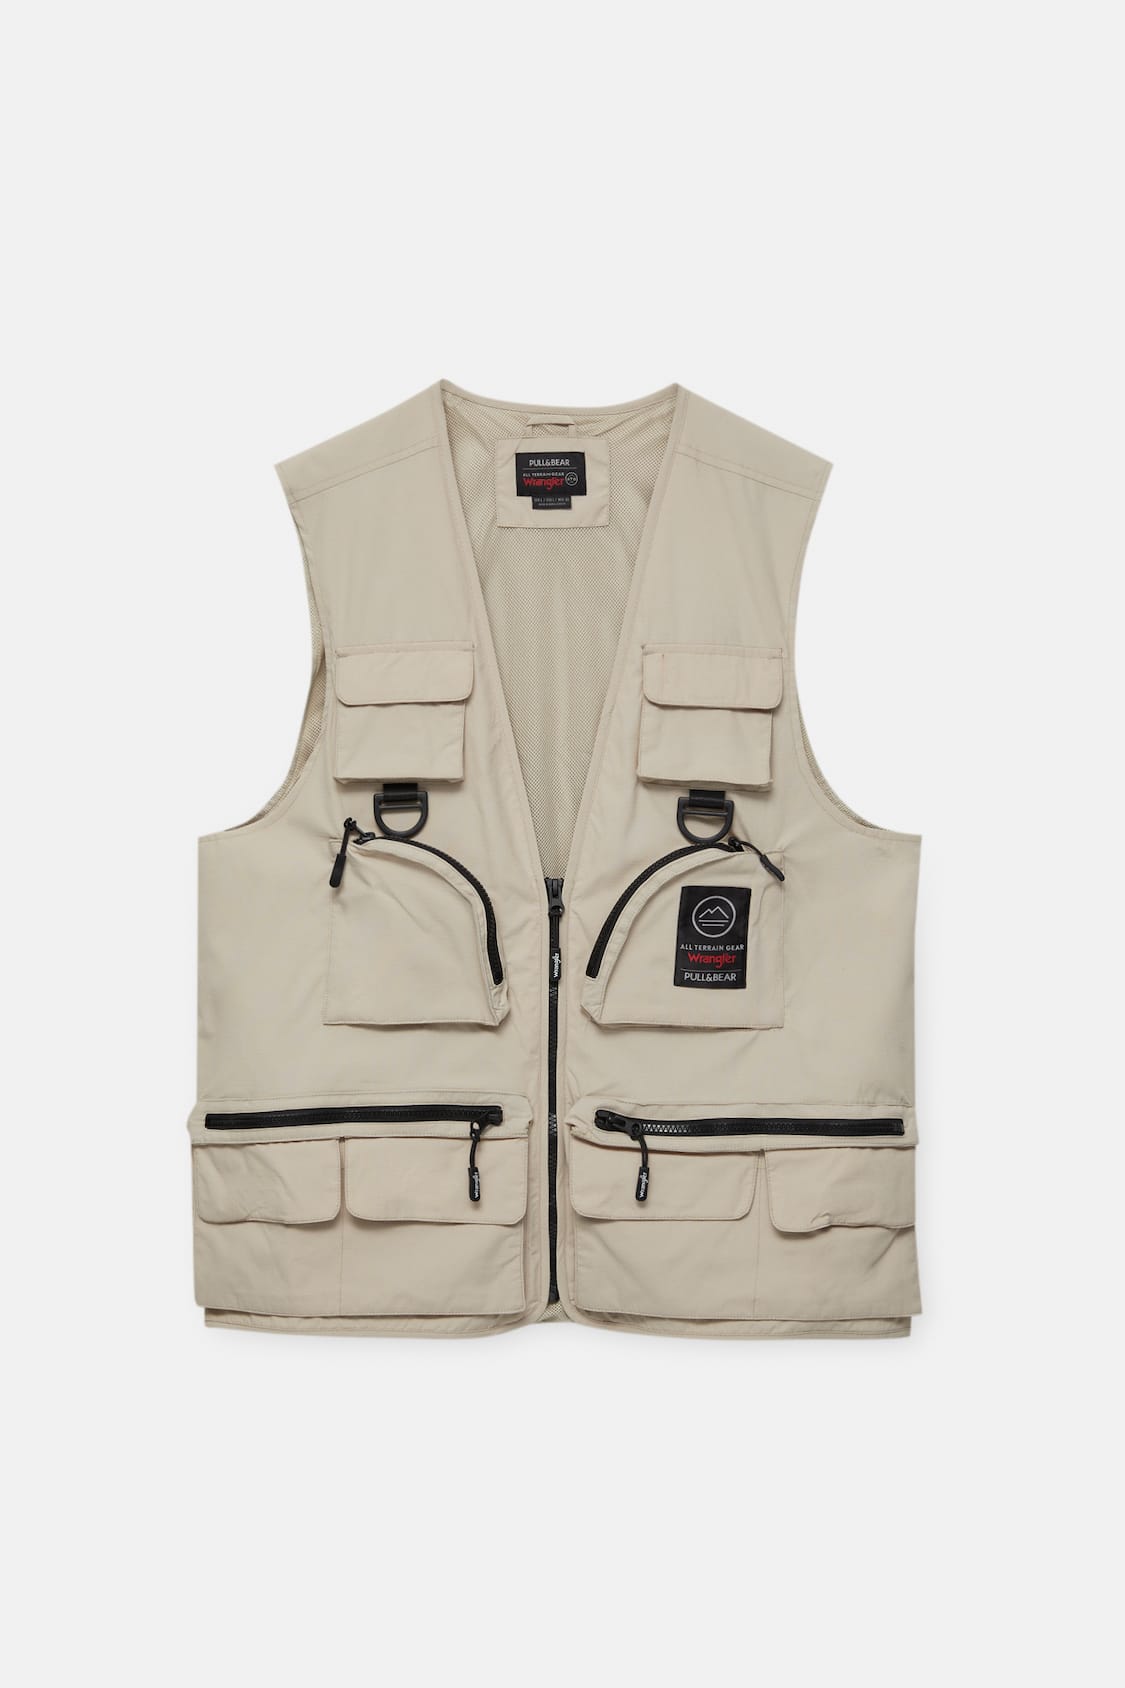 gilet homme pull and bear